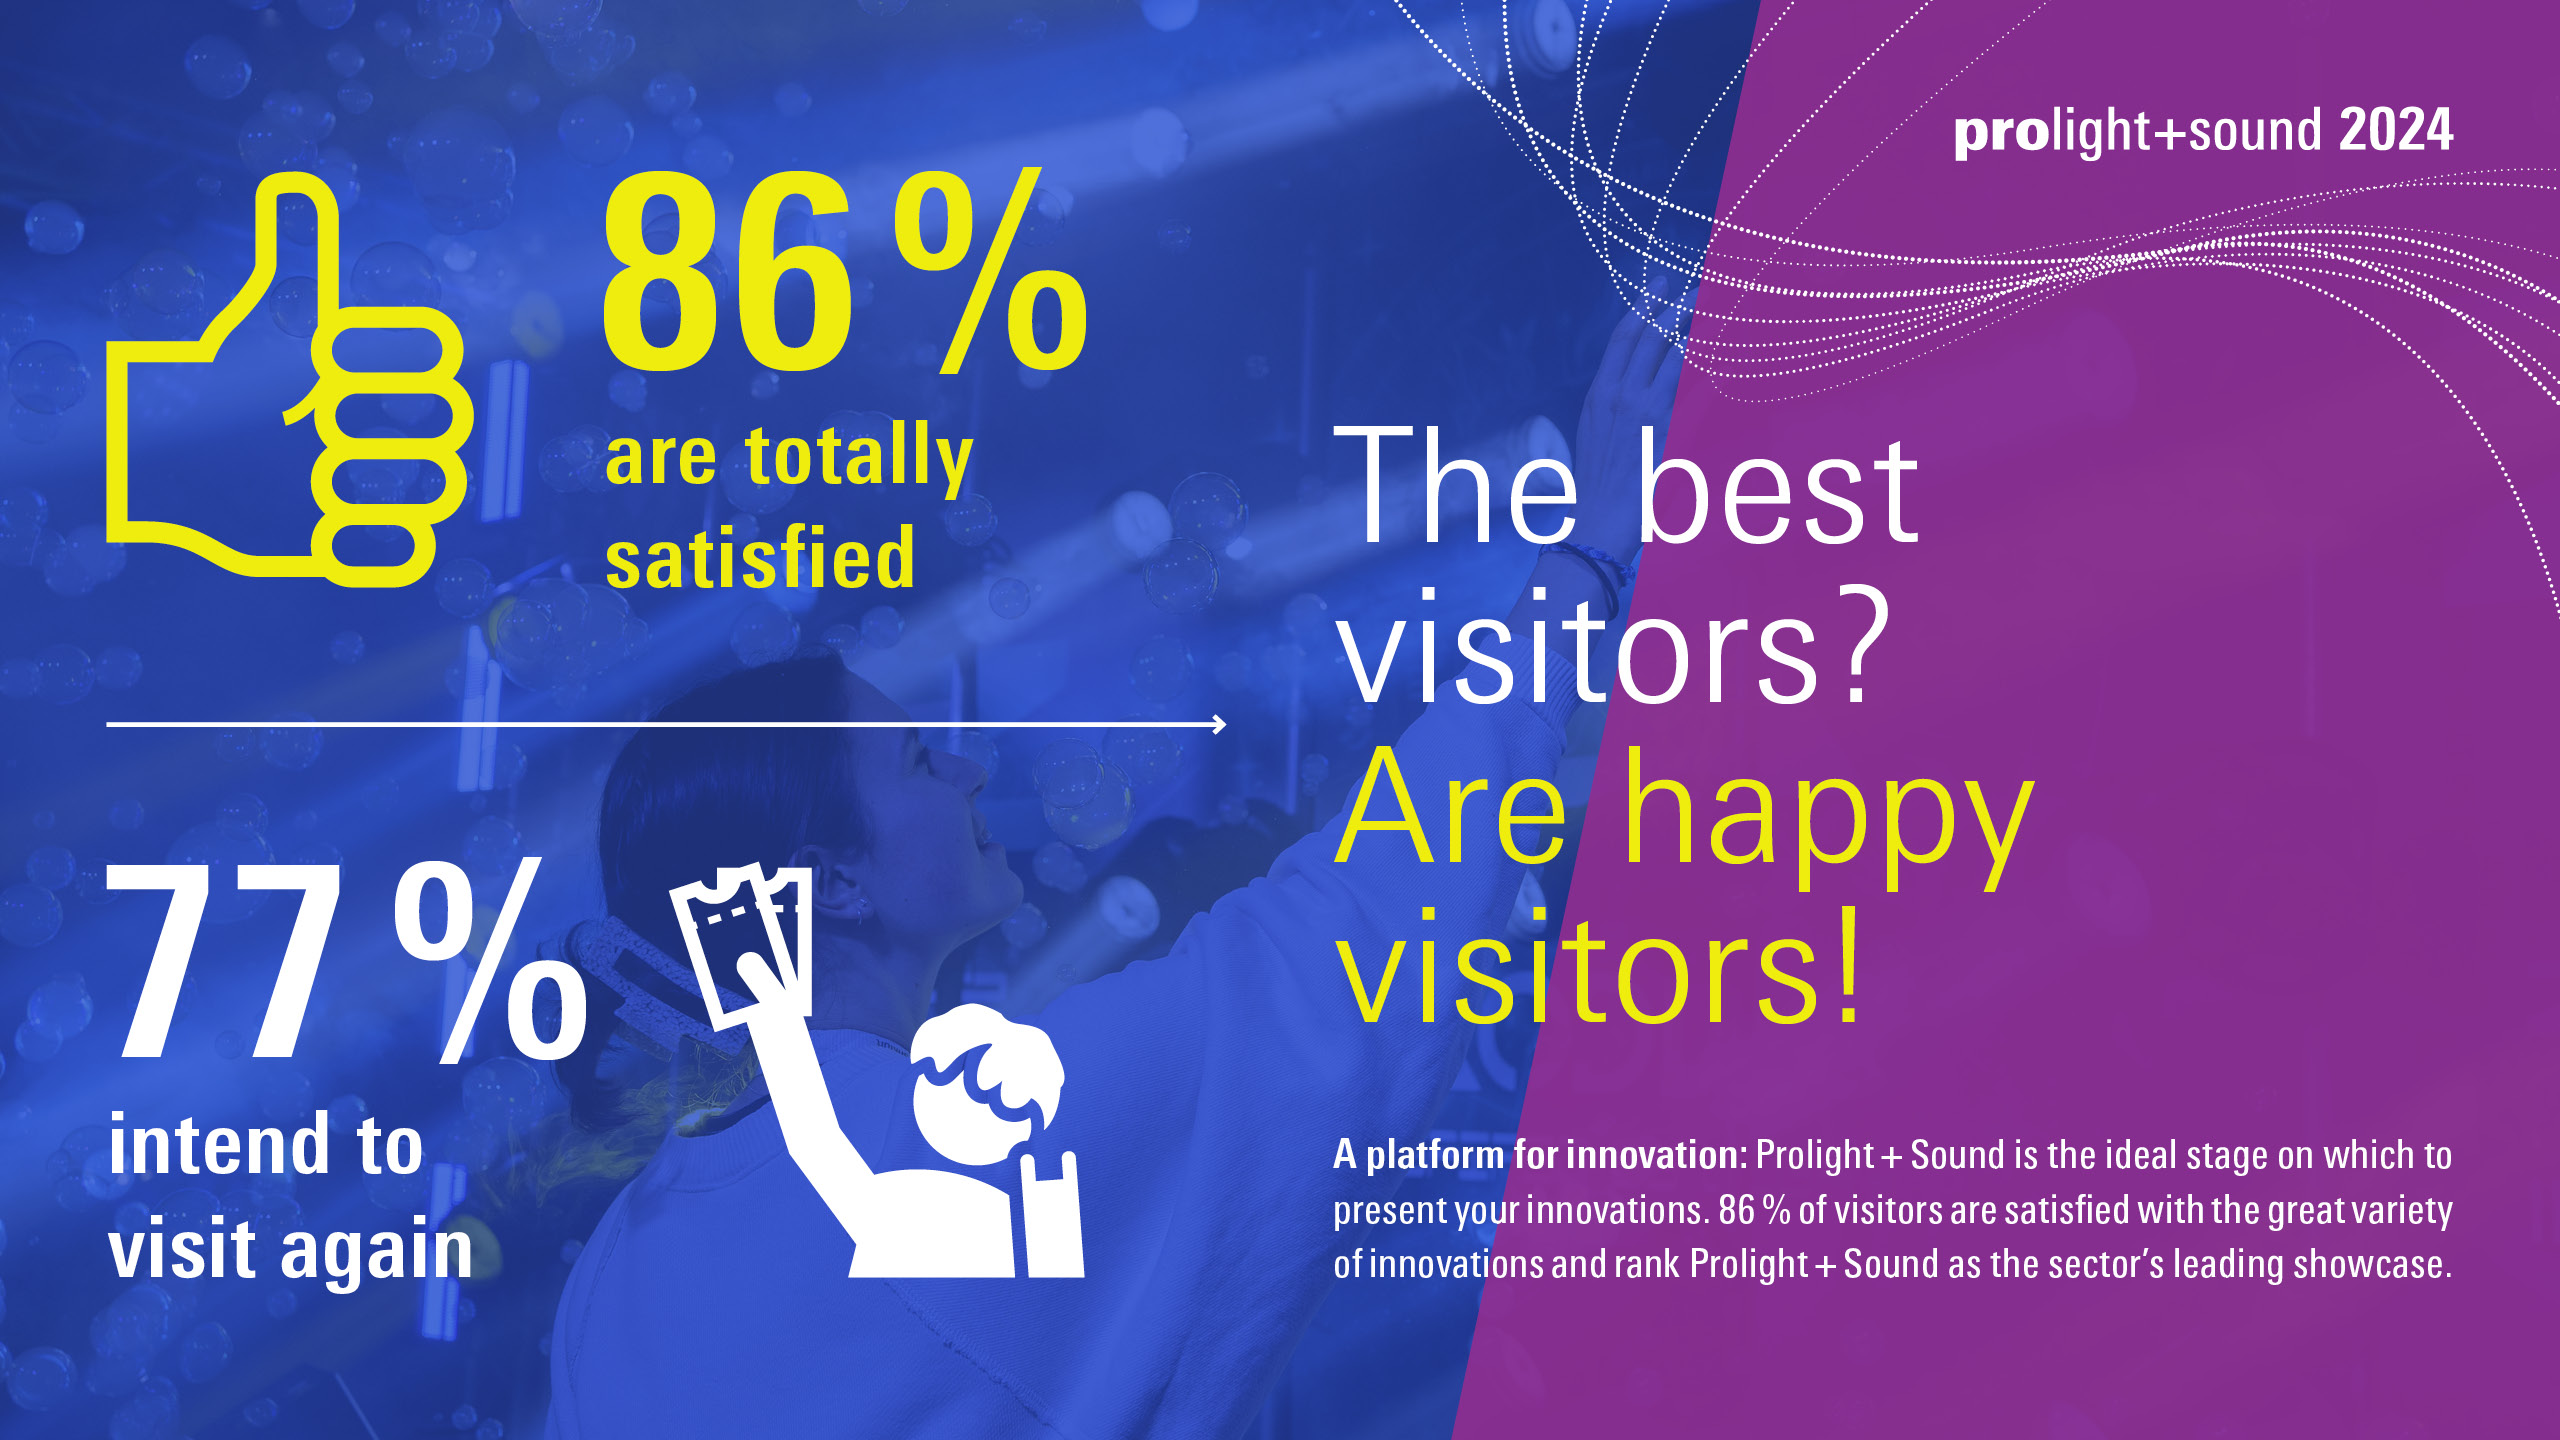 Prolight + Sound 2024 graphic: 86% overall satisfaction and 77% intention to return by visitors